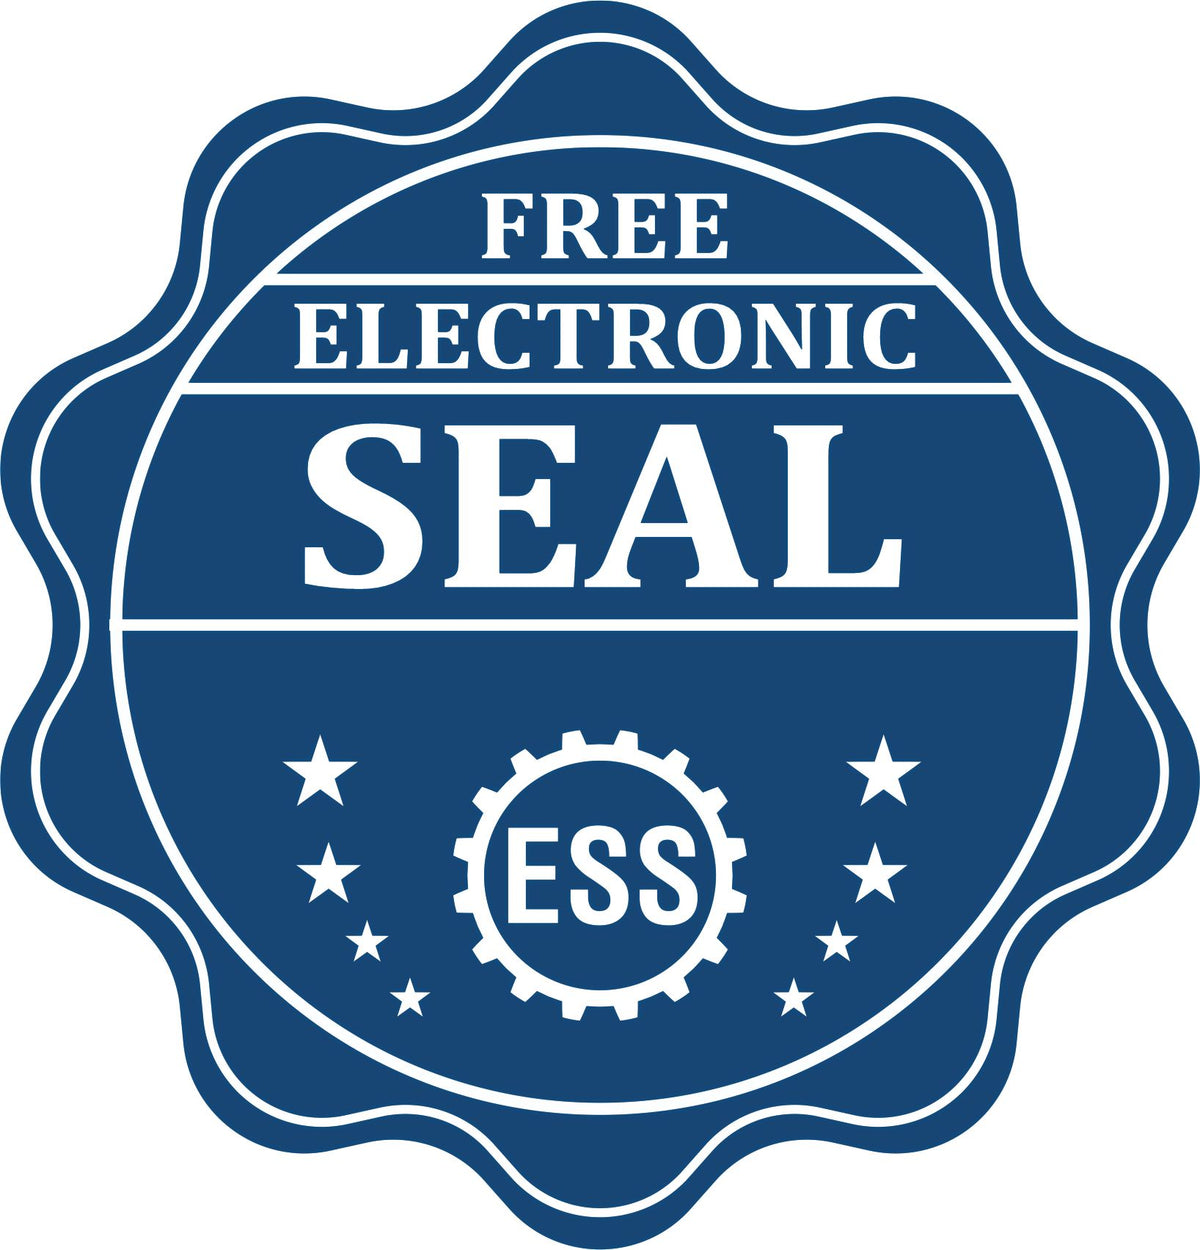 A badge showing a free electronic seal for the Gift Michigan Engineer Seal with stars and the ESS gear on the emblem.